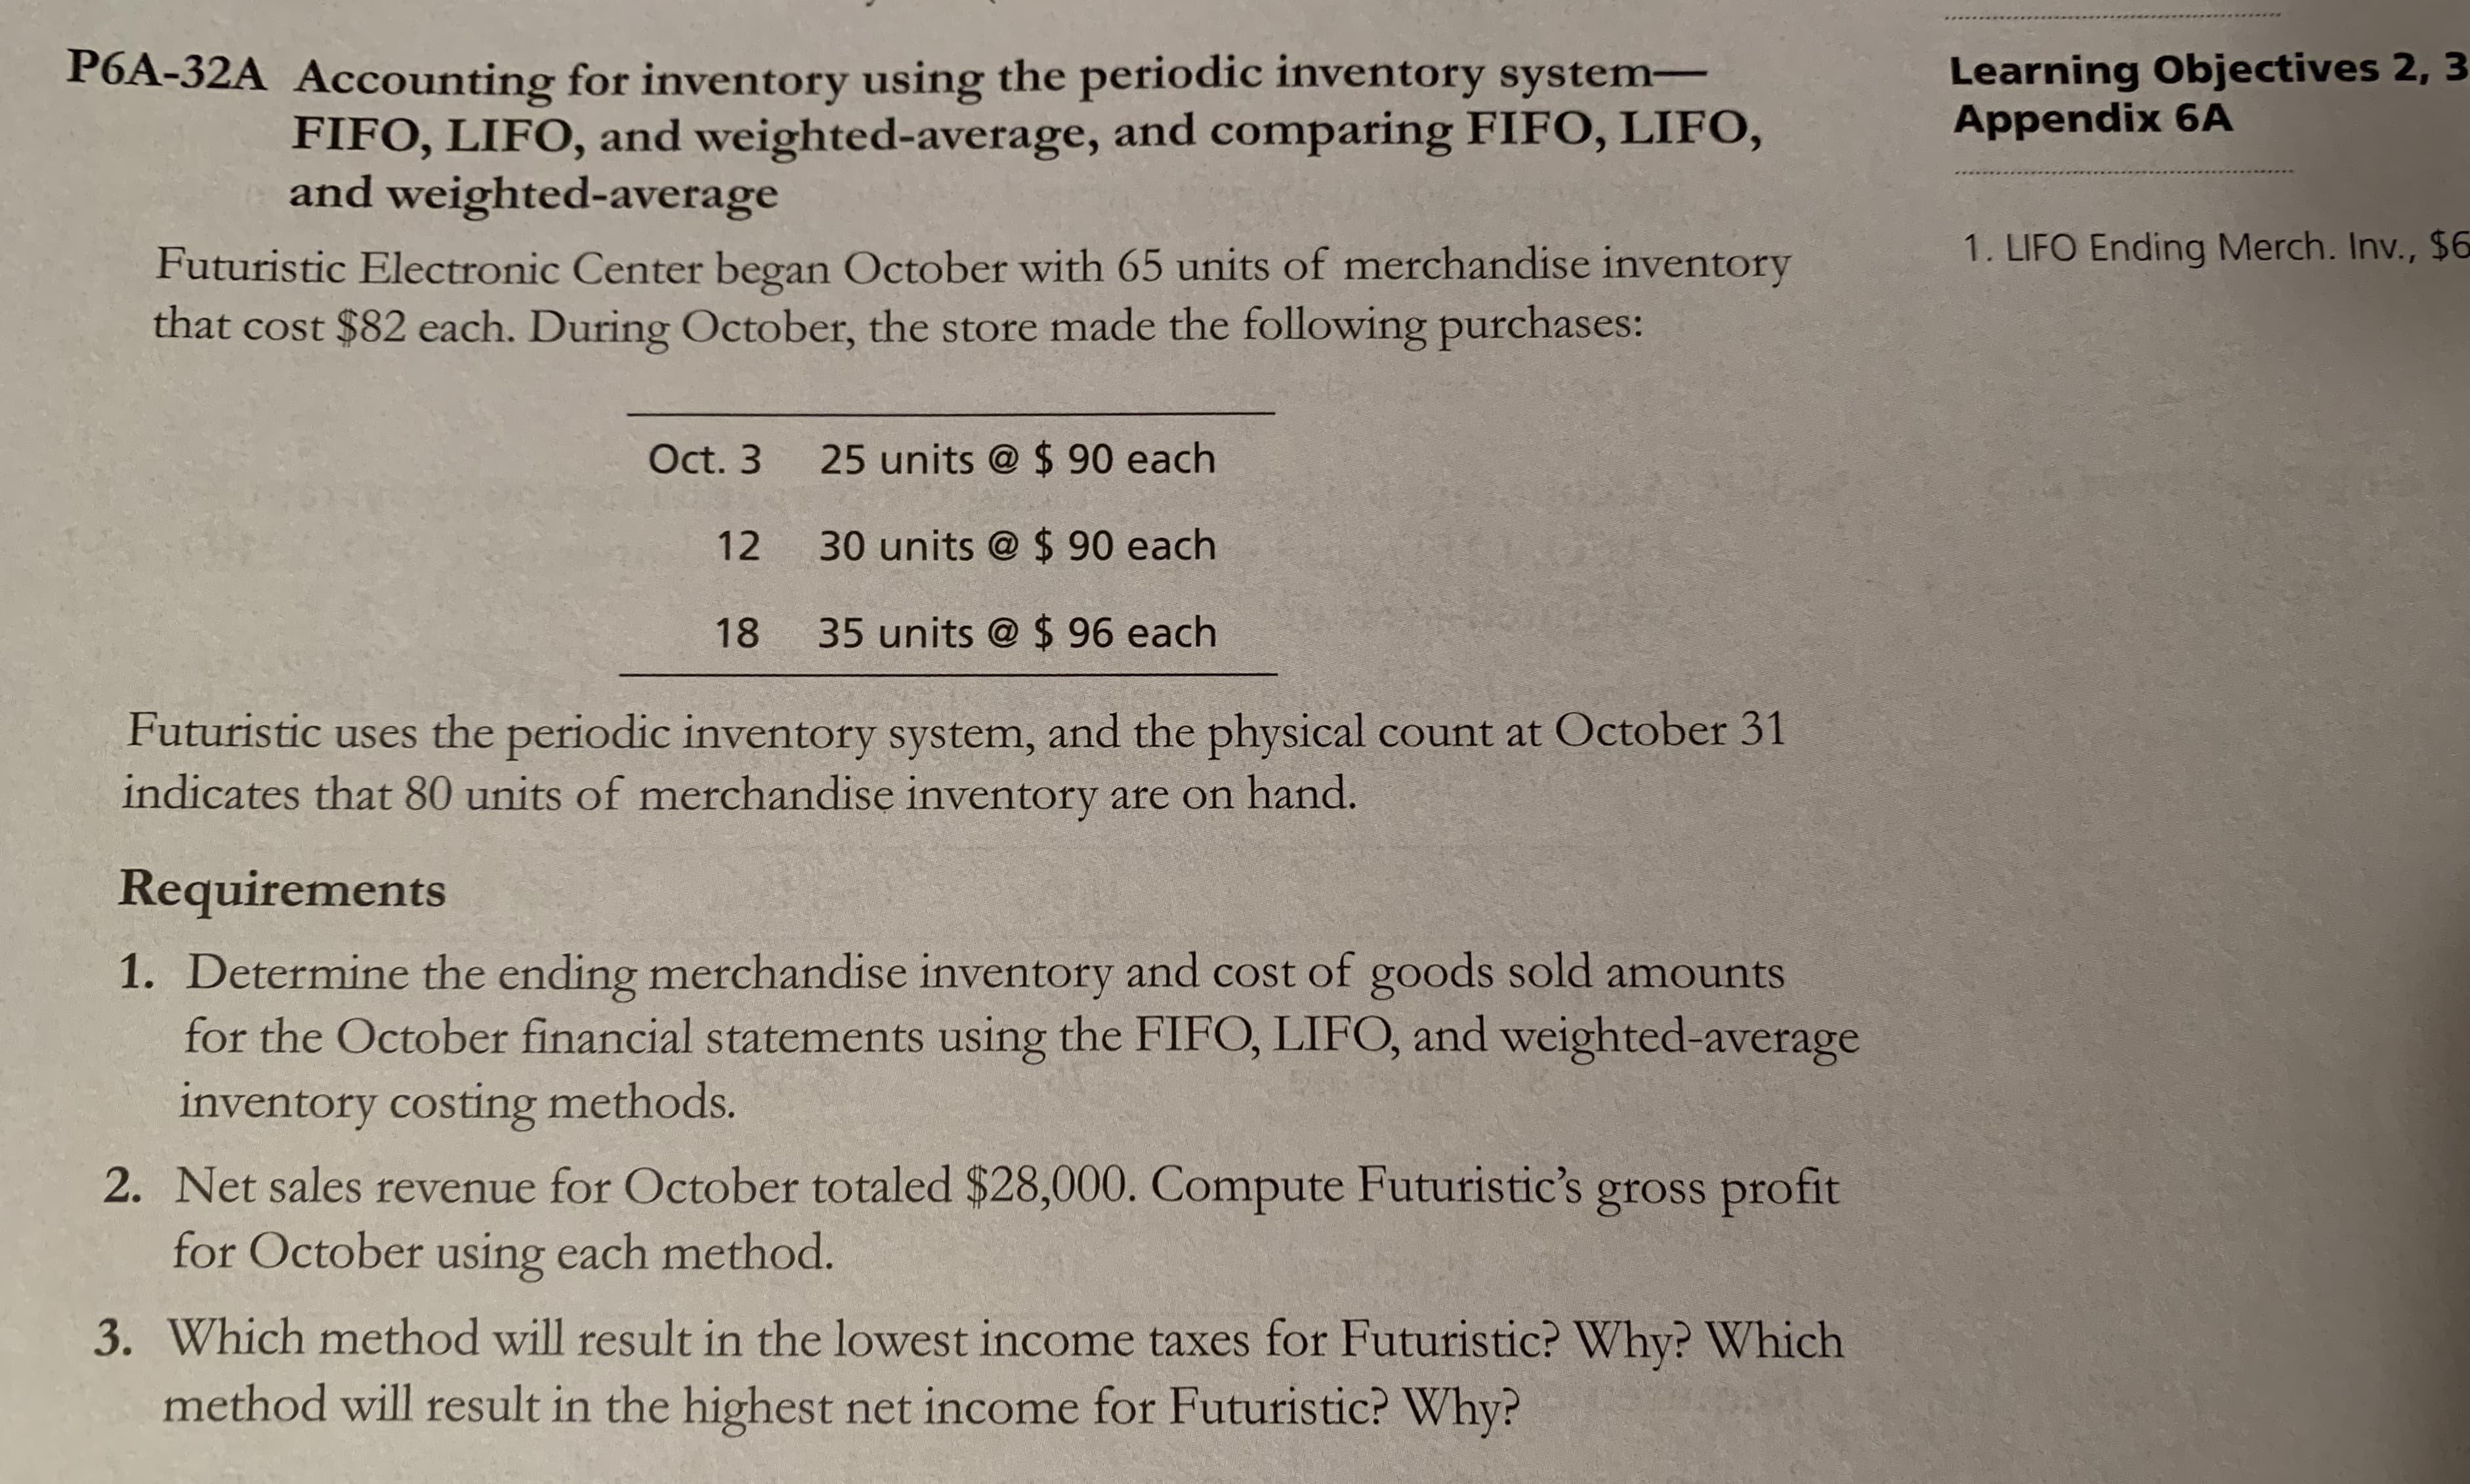 Learning Objectives 2, 3
Appendix 6A
P6A-32A Accounting for inventory using the periodic inventory system
FIFO, LIFO, and weighted-average, and comparing FIFO, LIFO,
and weighted-average
1. LIFO Ending Merch. Inv., $6
Futuristic Electronic Center began October with 65 units of merchandise inventory
that cost $82 each. During October, the store made the following purchases:
25 units @ $ 90 each
Oct. 3
30 units @ $ 90 each
12
35 units @ $ 96 each
18
Futuristic uses the periodic inventory system, and the physical count at October 31
indicates that 80 units of merchandise inventory are on hand.
Requirements
1. Determine the ending merchandise inventory and cost of goods sold amounts
for the October financial statements using the FIFO, LIFO, and weighted-average
inventory costing methods.
2. Net sales revenue for October totaled $28,000. Compute Futuristic's gross profit
for October using each method.
3. Which method will result in the lowest income taxes for Futuristic? Why? Which
method will result in the highest net income for Futuristic? Why?
